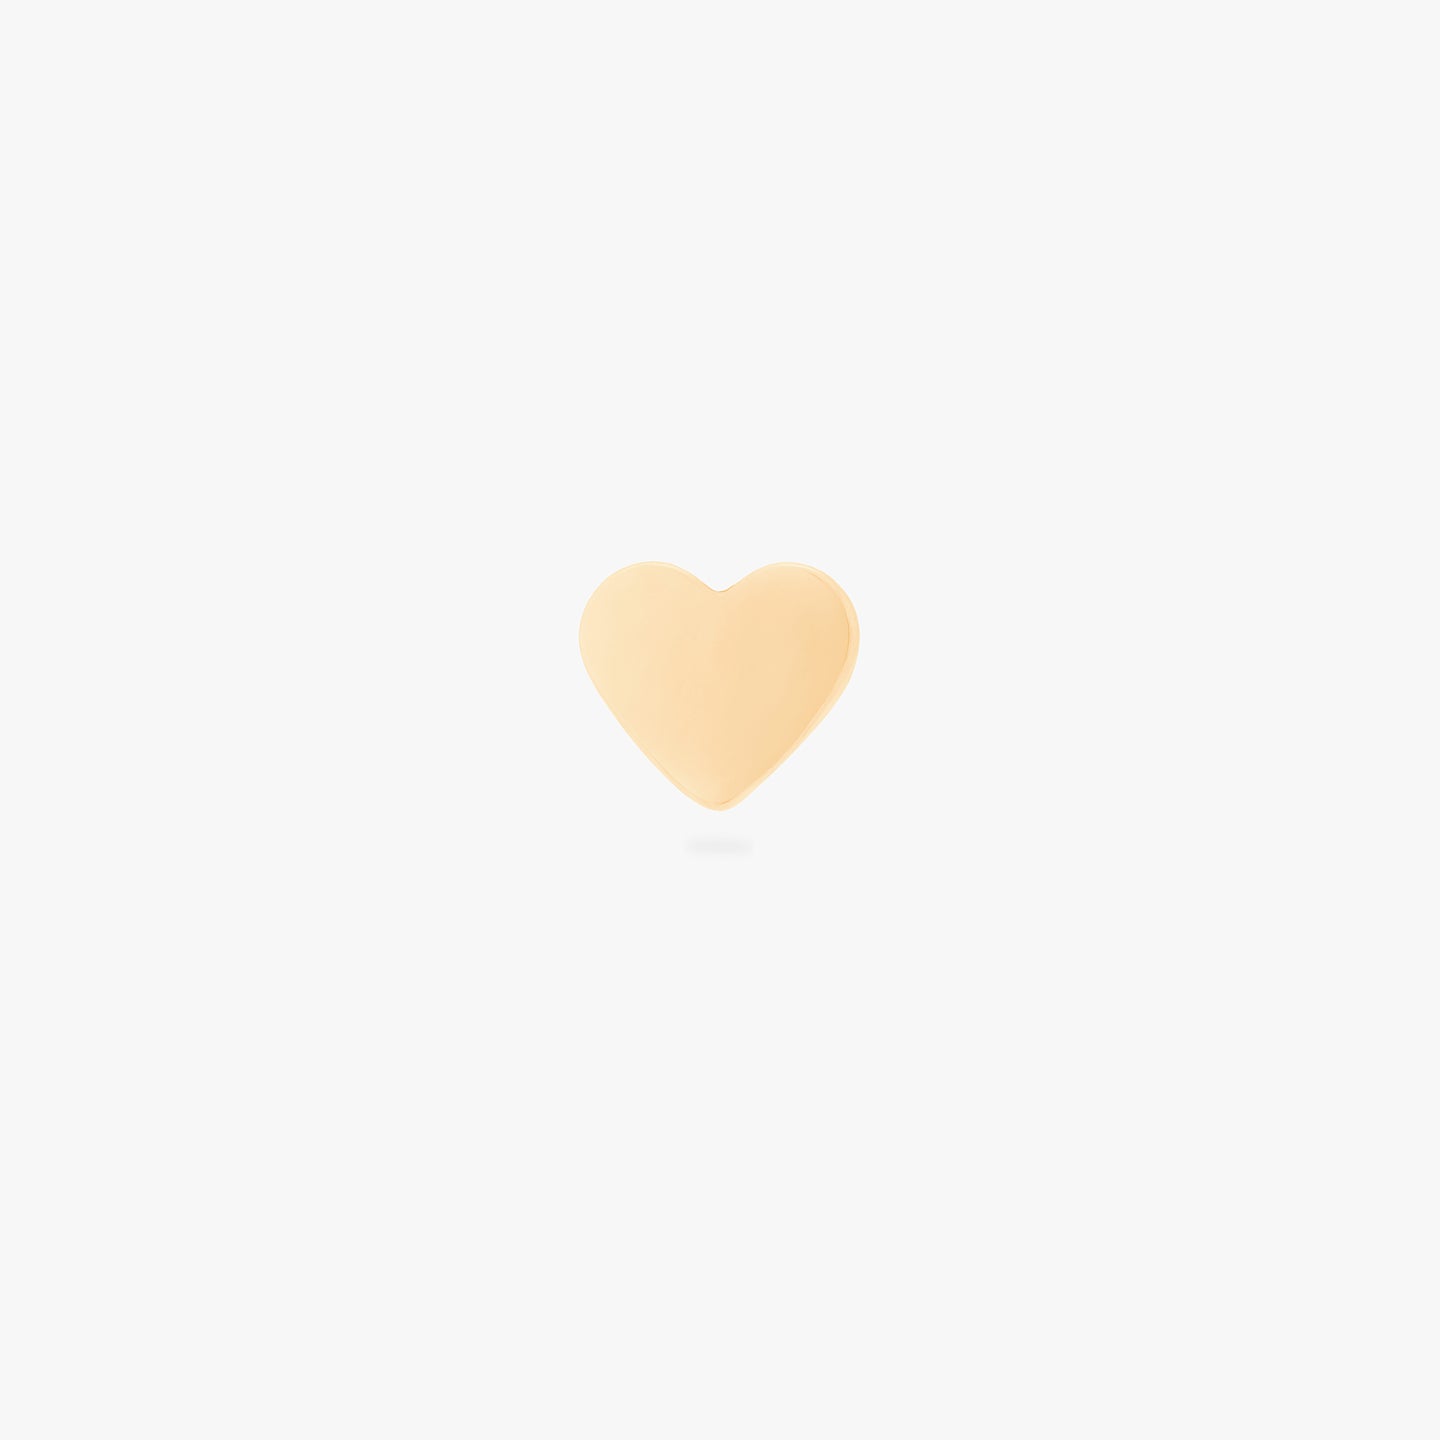 This is an image of a 6mm length gold flatback post with a heart-shaped disc. color:null|6mm